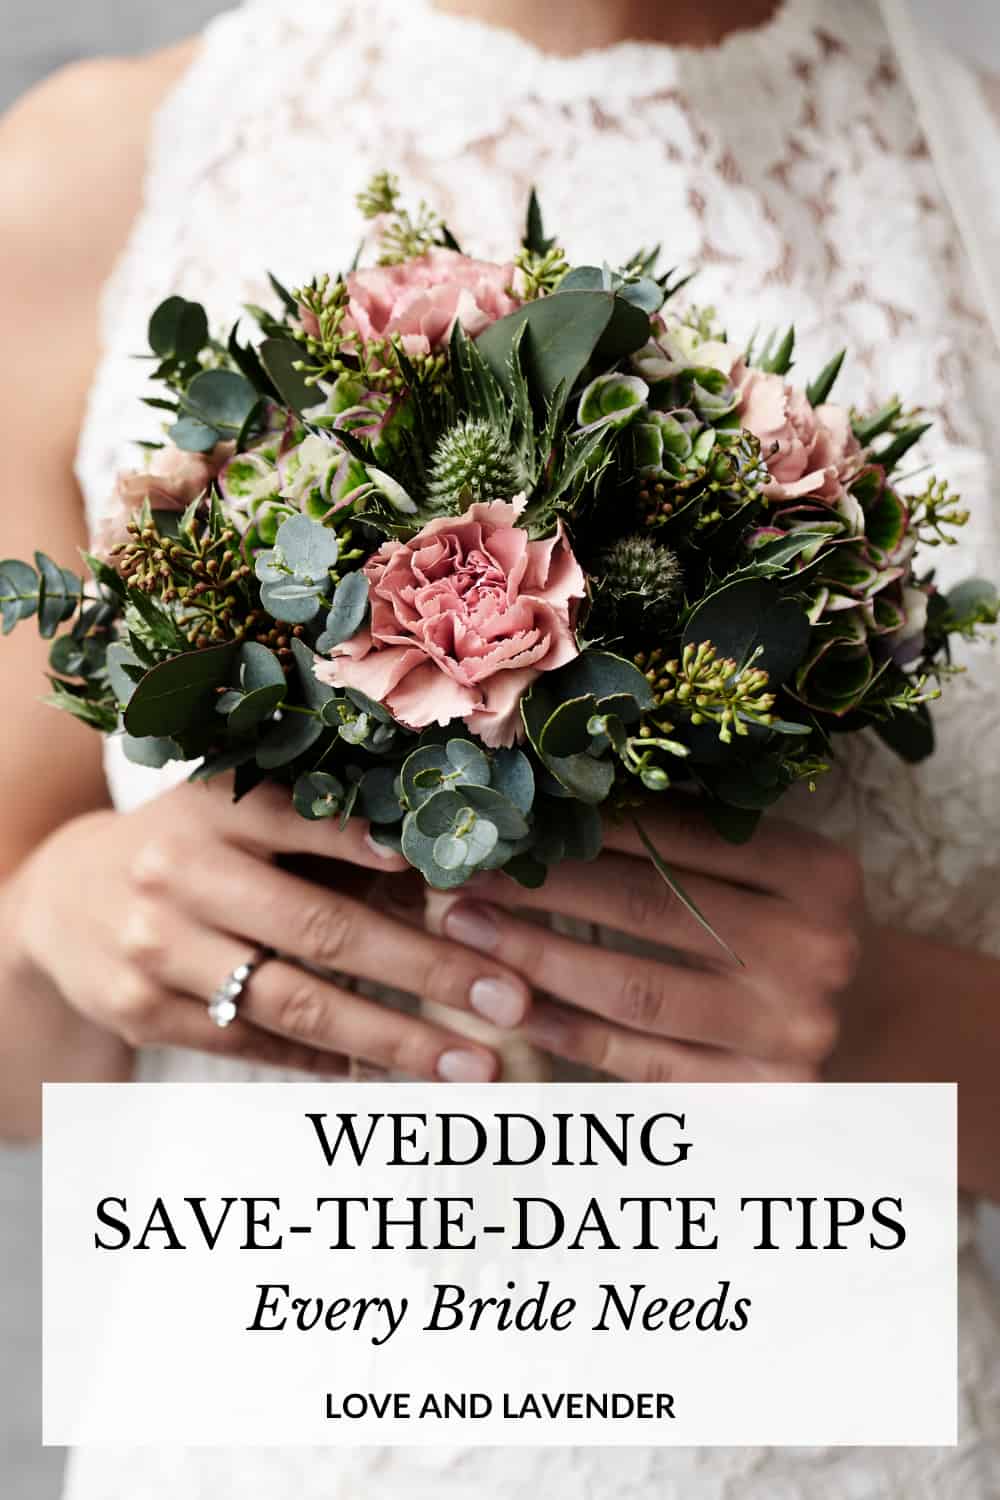 7 Wedding Save-the-Date Tips Every Bride Needs